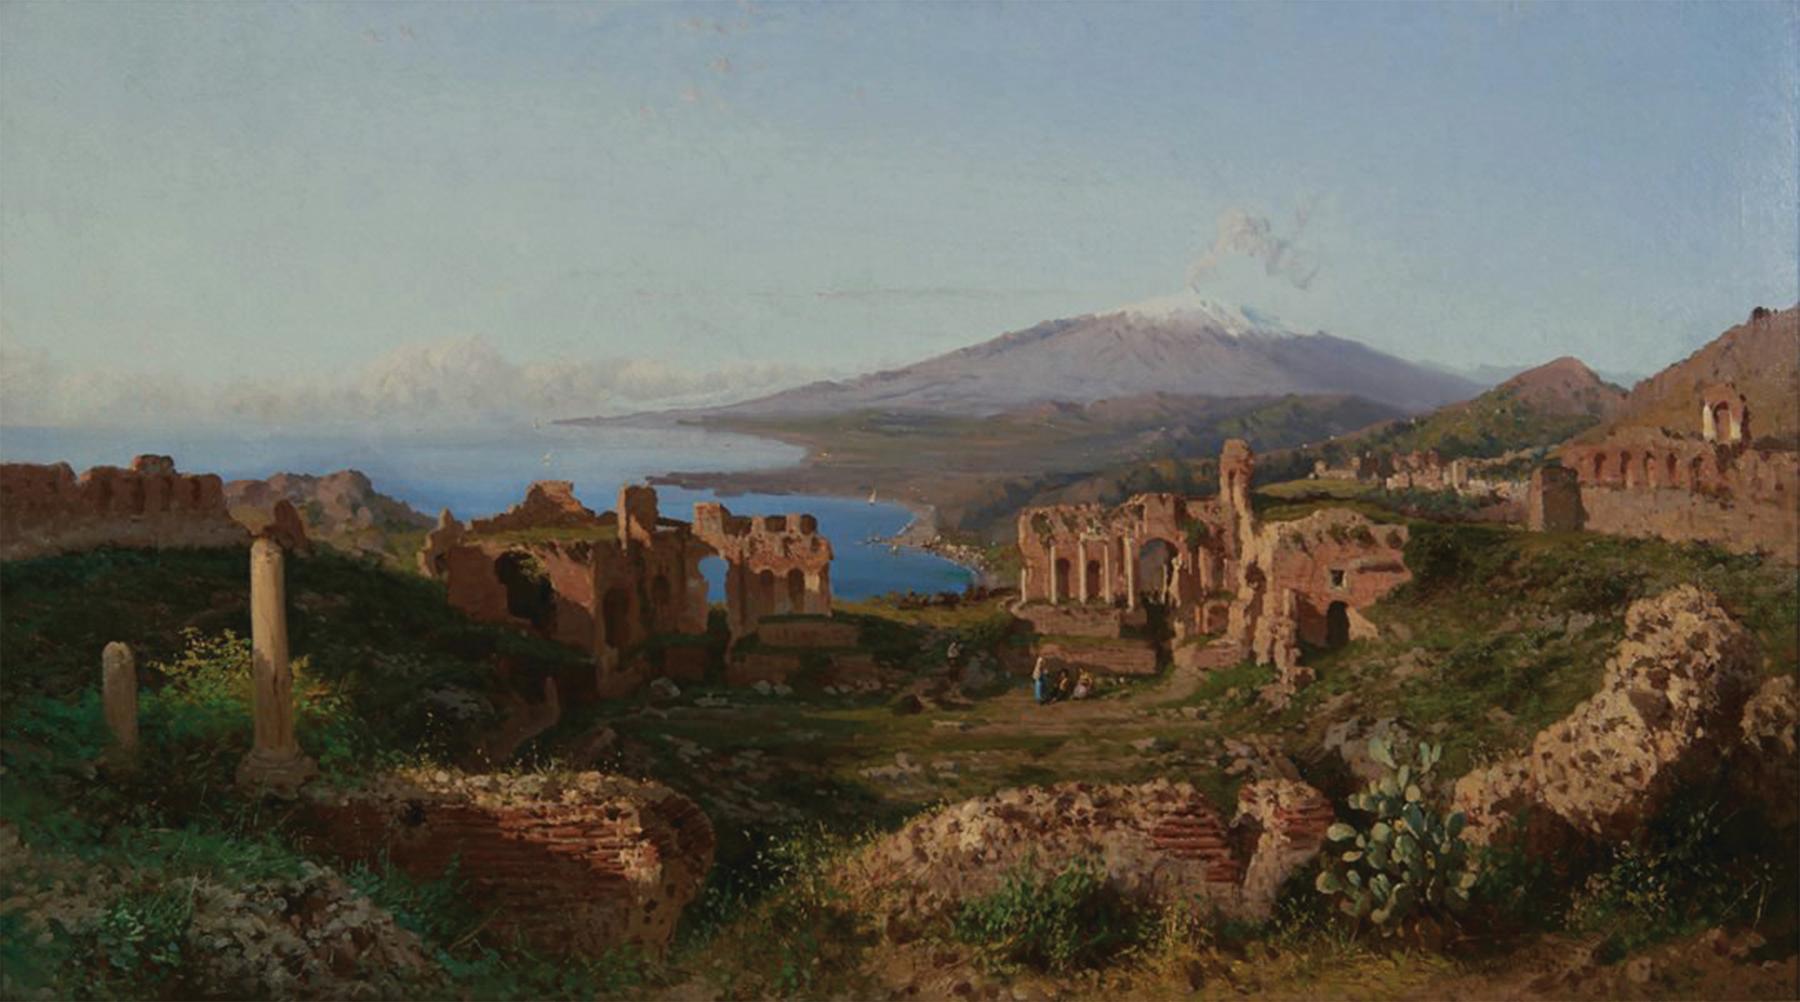 Alessandro La Volpe Landscape Painting - View of Mt. Etna From the Ruins of the Theatre at Taormina, 19th Century Italian